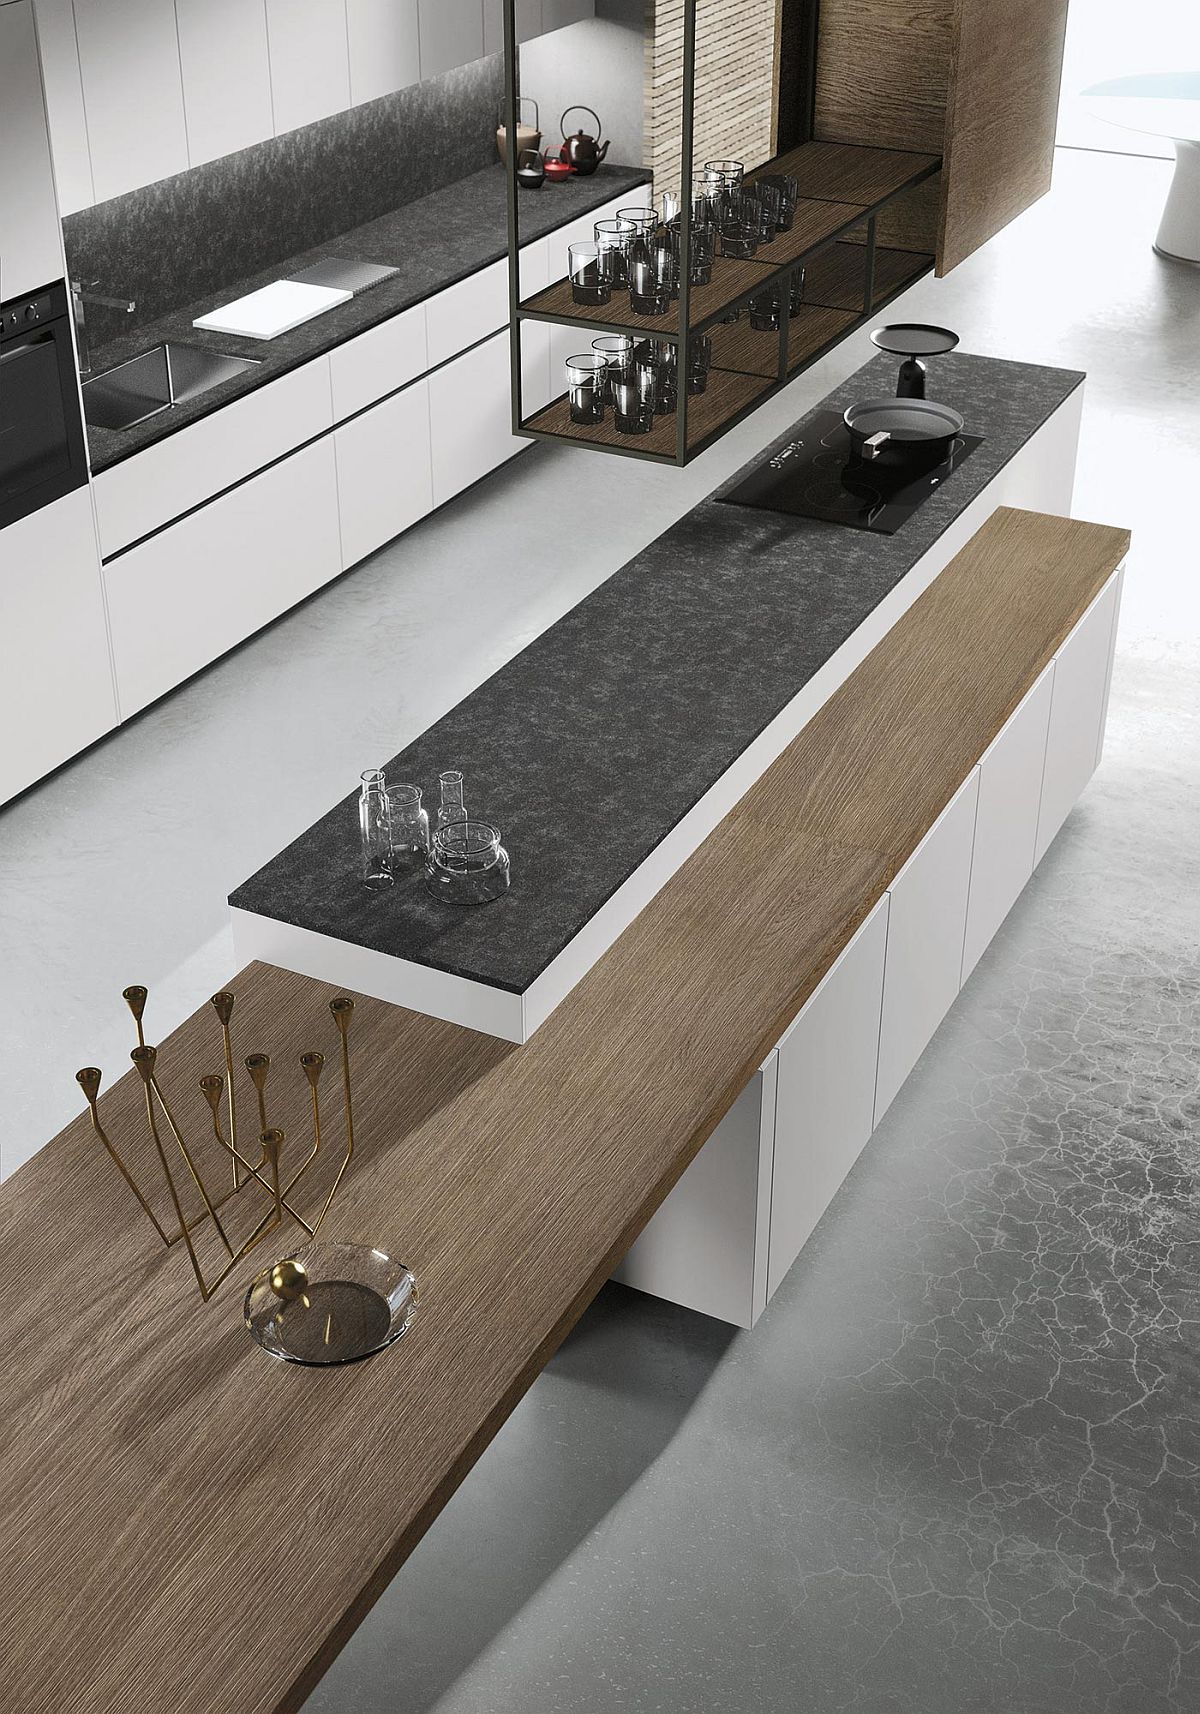 Adjustable and adaptable woodedn worktop for the Look Kitchen